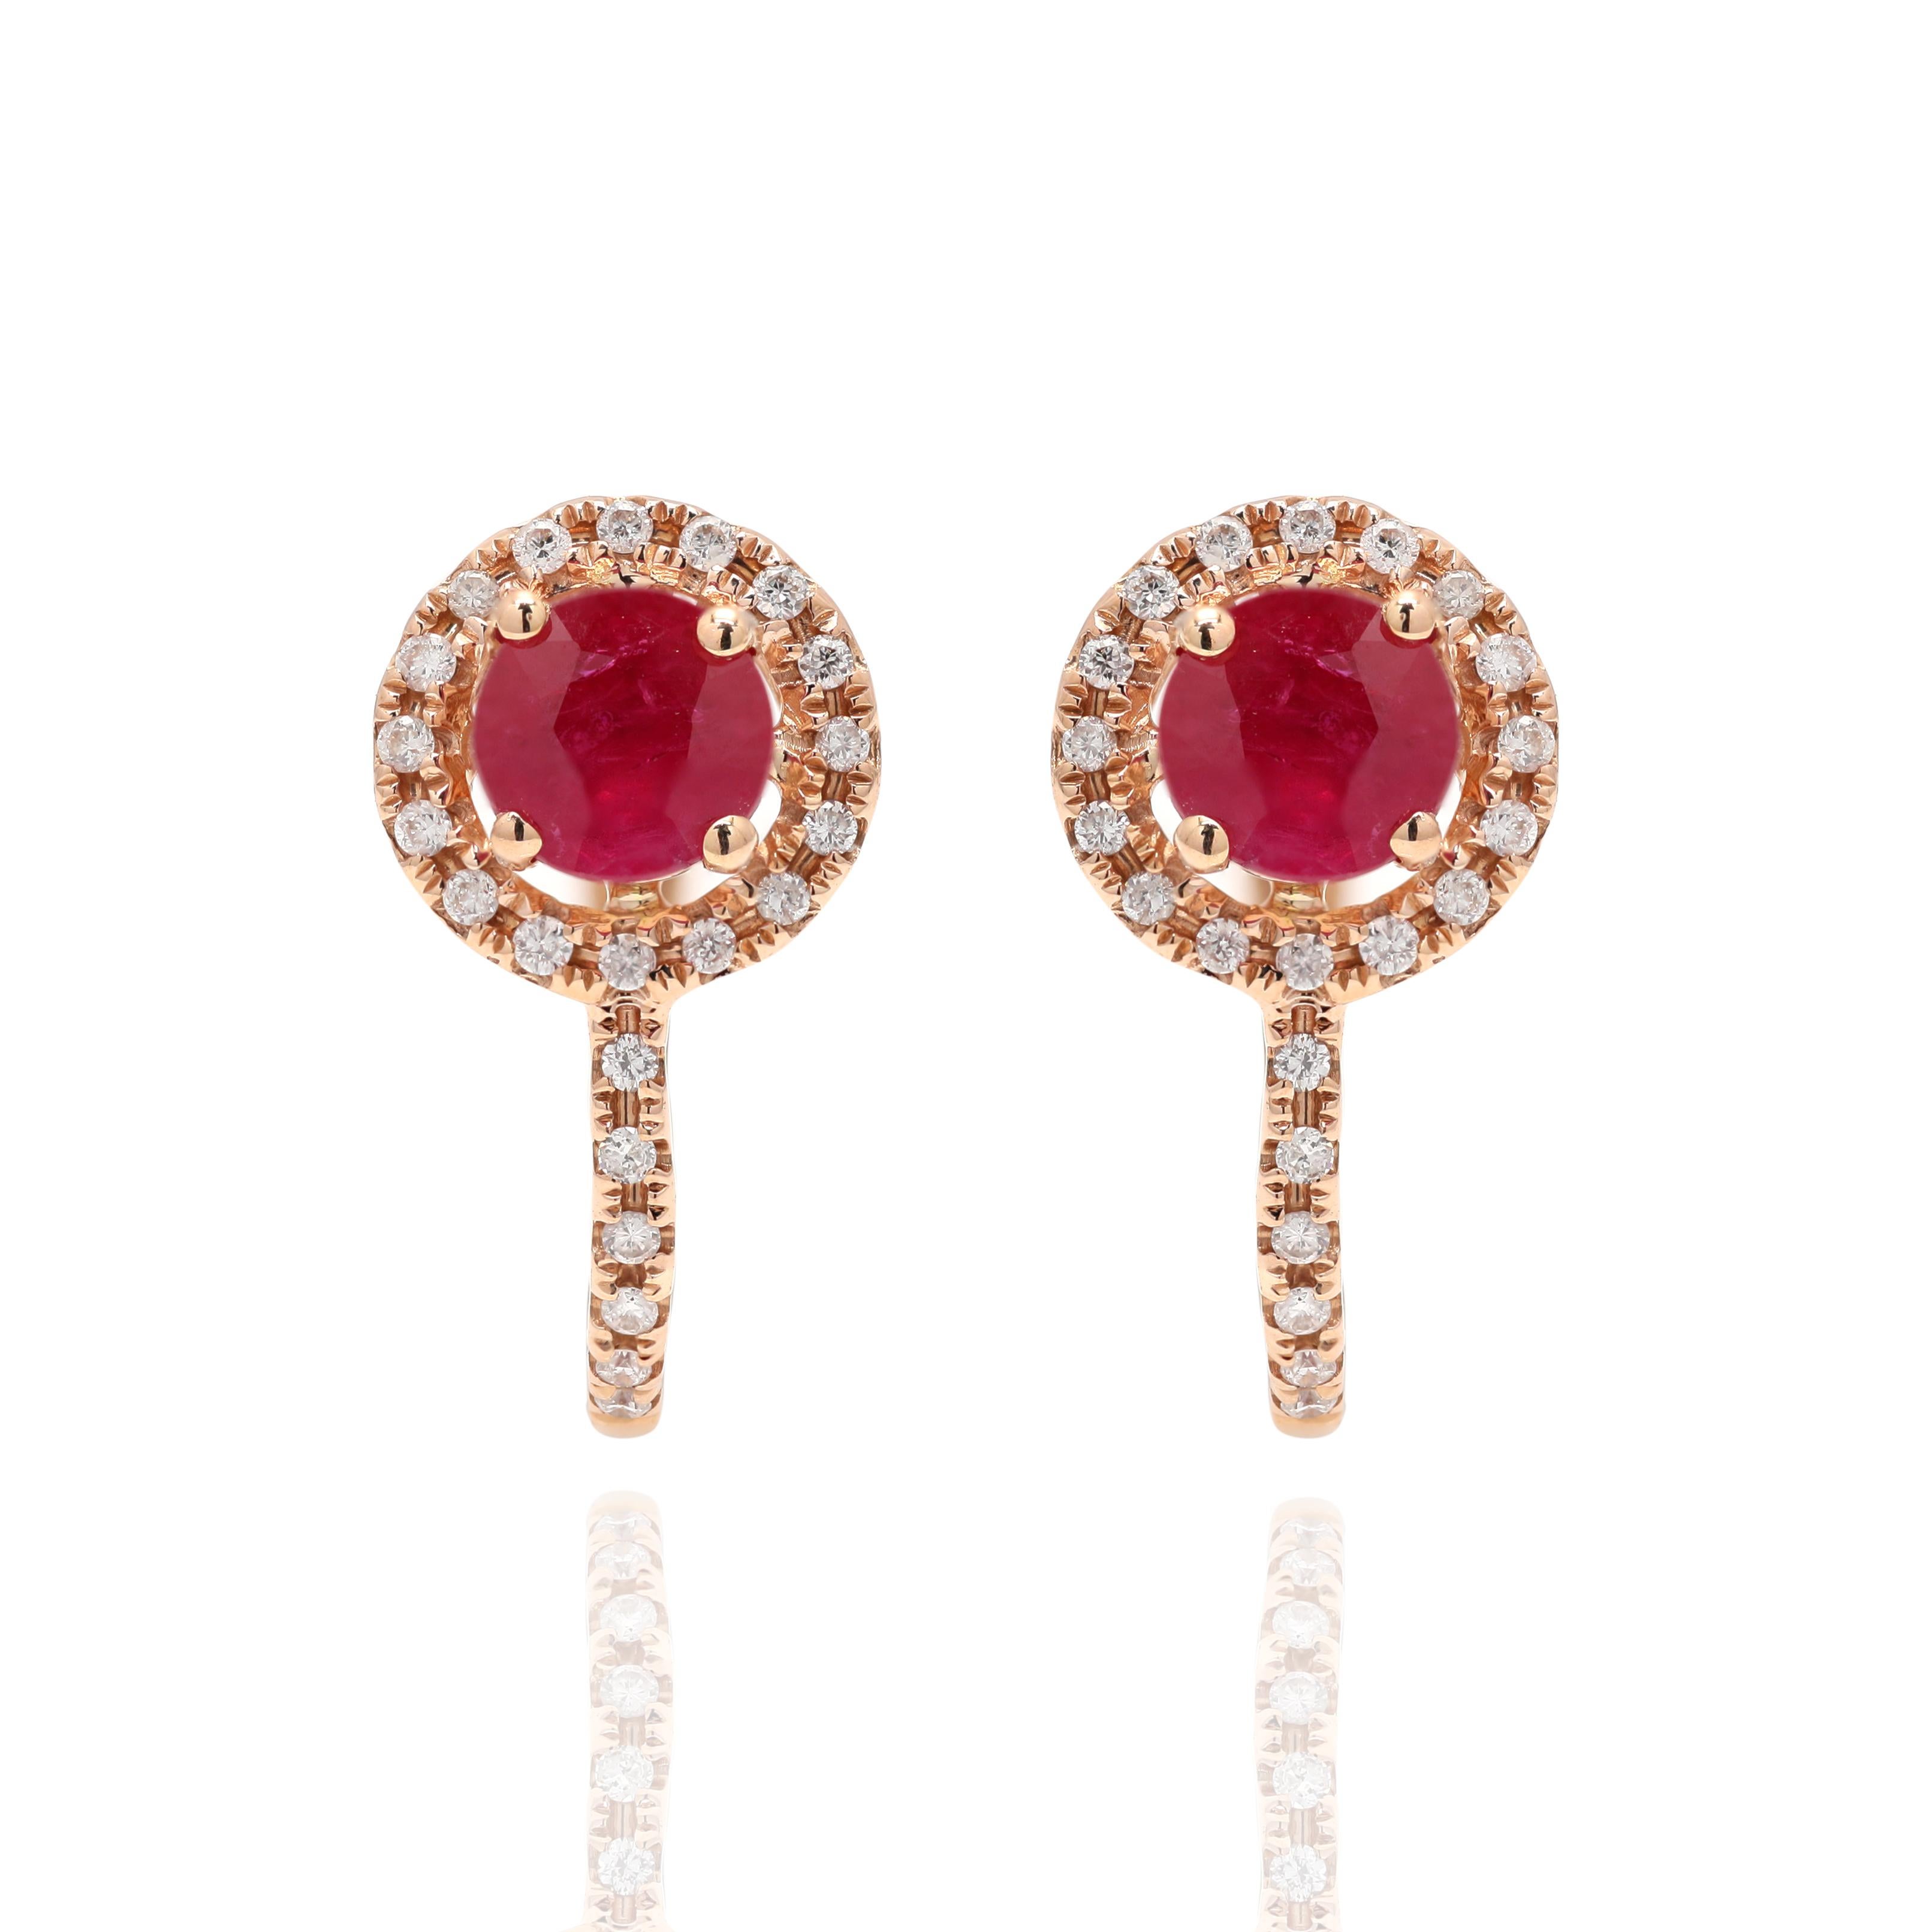 Round Cut Ruby and Diamond Anniversary Earrings Gift in 14K Gold. Embrace your look with these stunning pair of earrings suitable for any occasion to complete your outfit.
Earrings create a subtle beauty while showcasing the colors of the natural